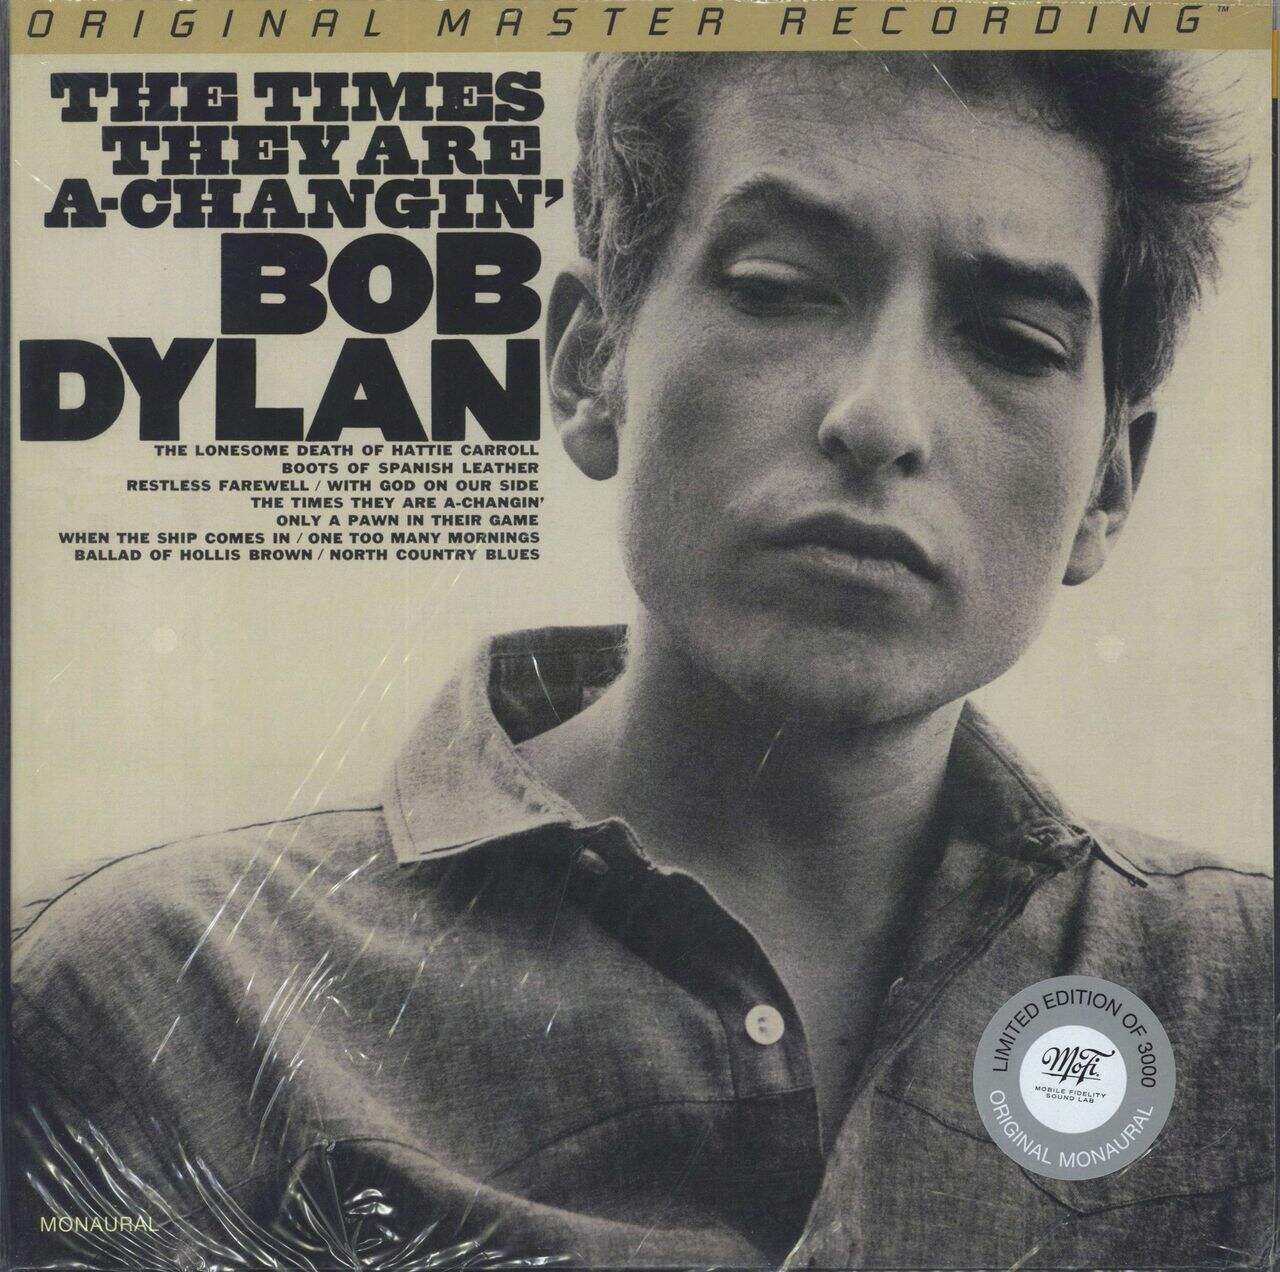 Bob Dylan The Times They Are A-Changin' - 180gm 45rpm - Sealed US 2-LP vinyl set